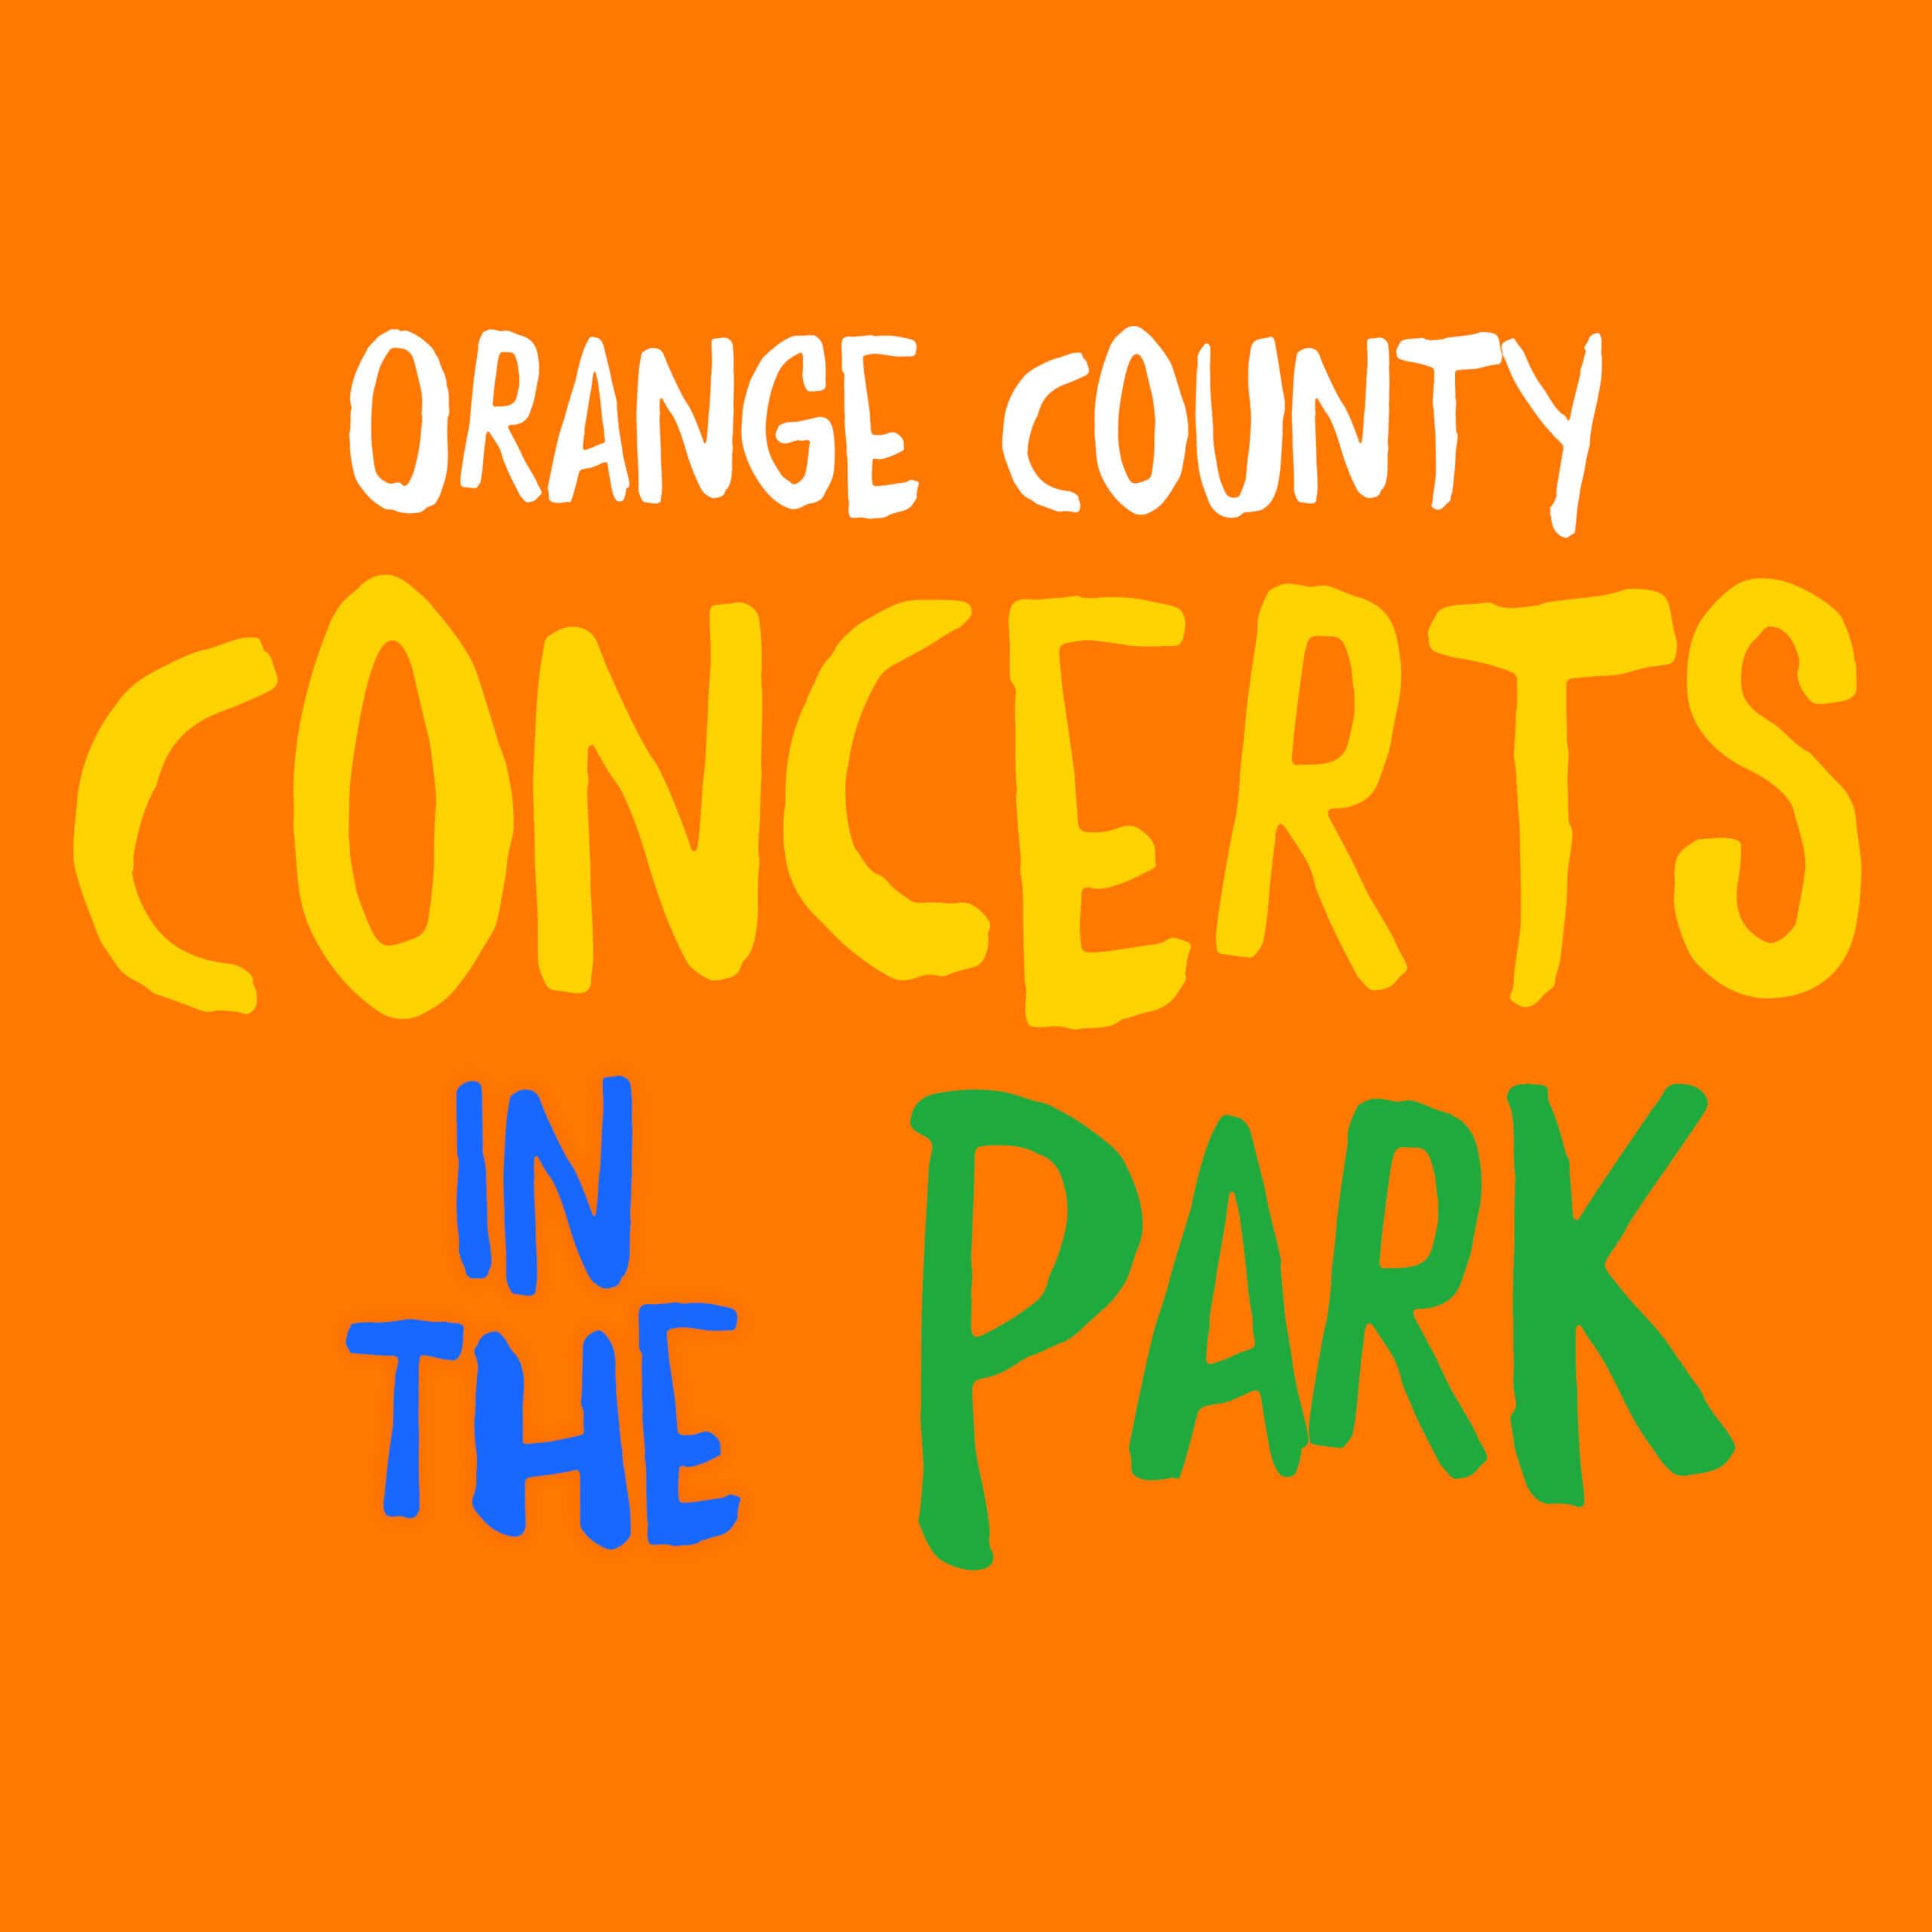 Orange County Concerts in the Park and Music festivals